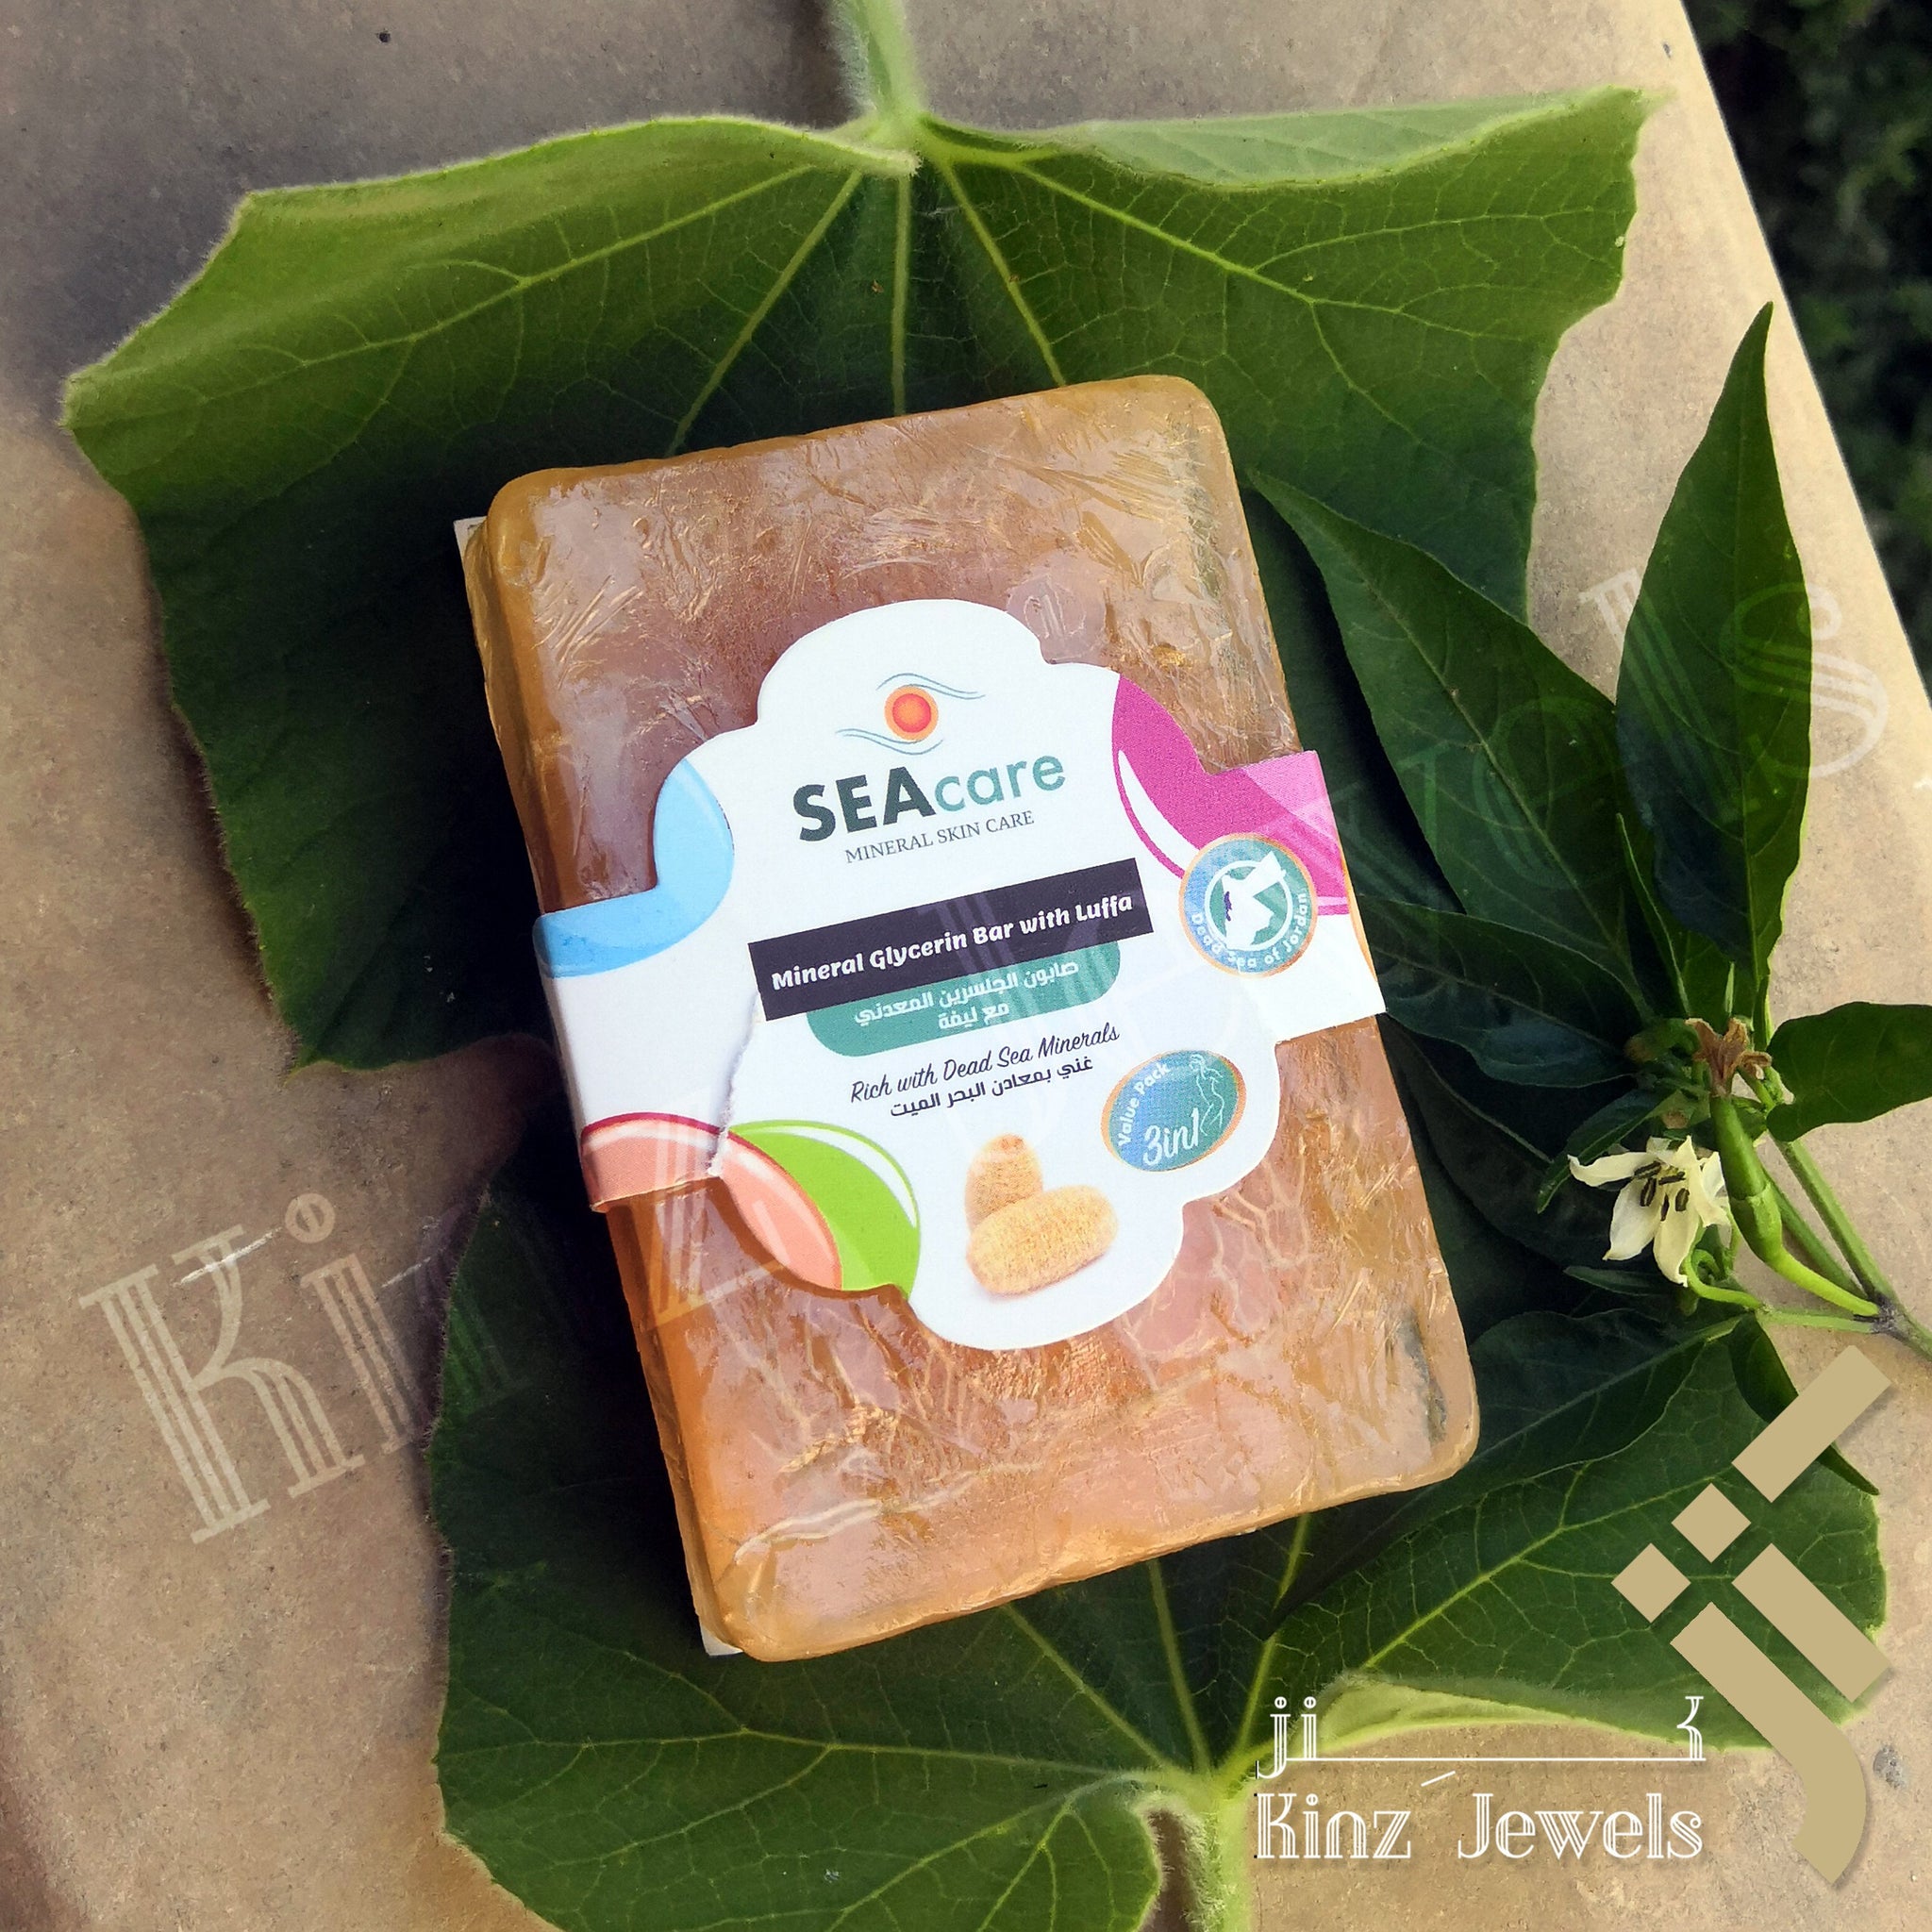 kinzjewels - Strong Flowers Dead Sea Minerals Glycerin Cleansing Bar with Natural Luffa